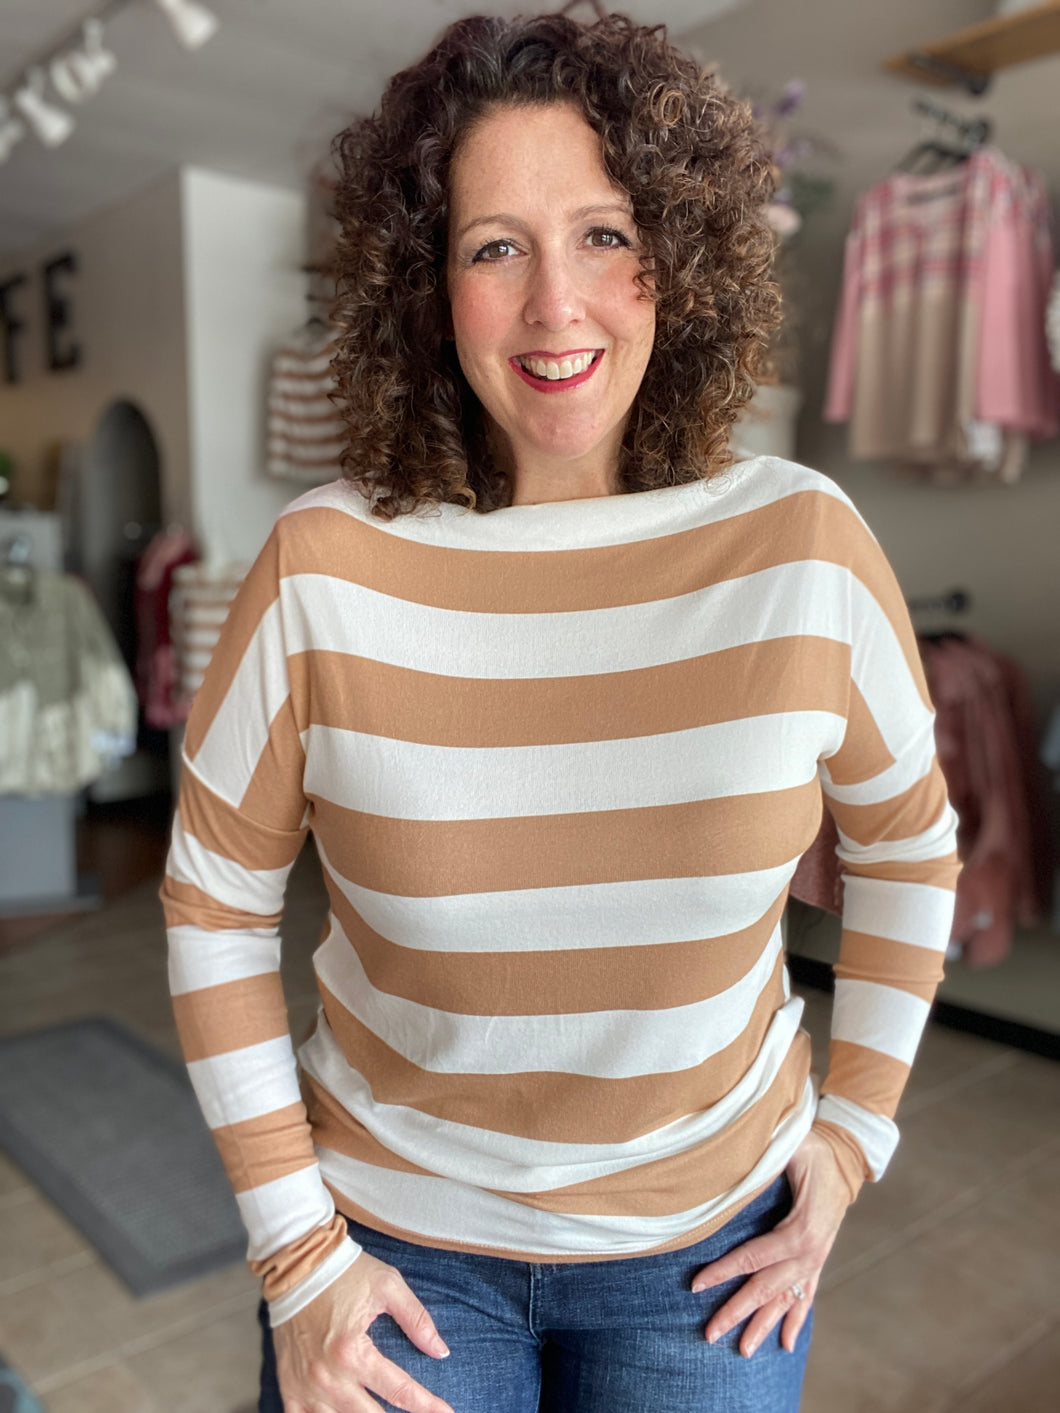 Striped Boatneck Top with Thumbhole Sleeves